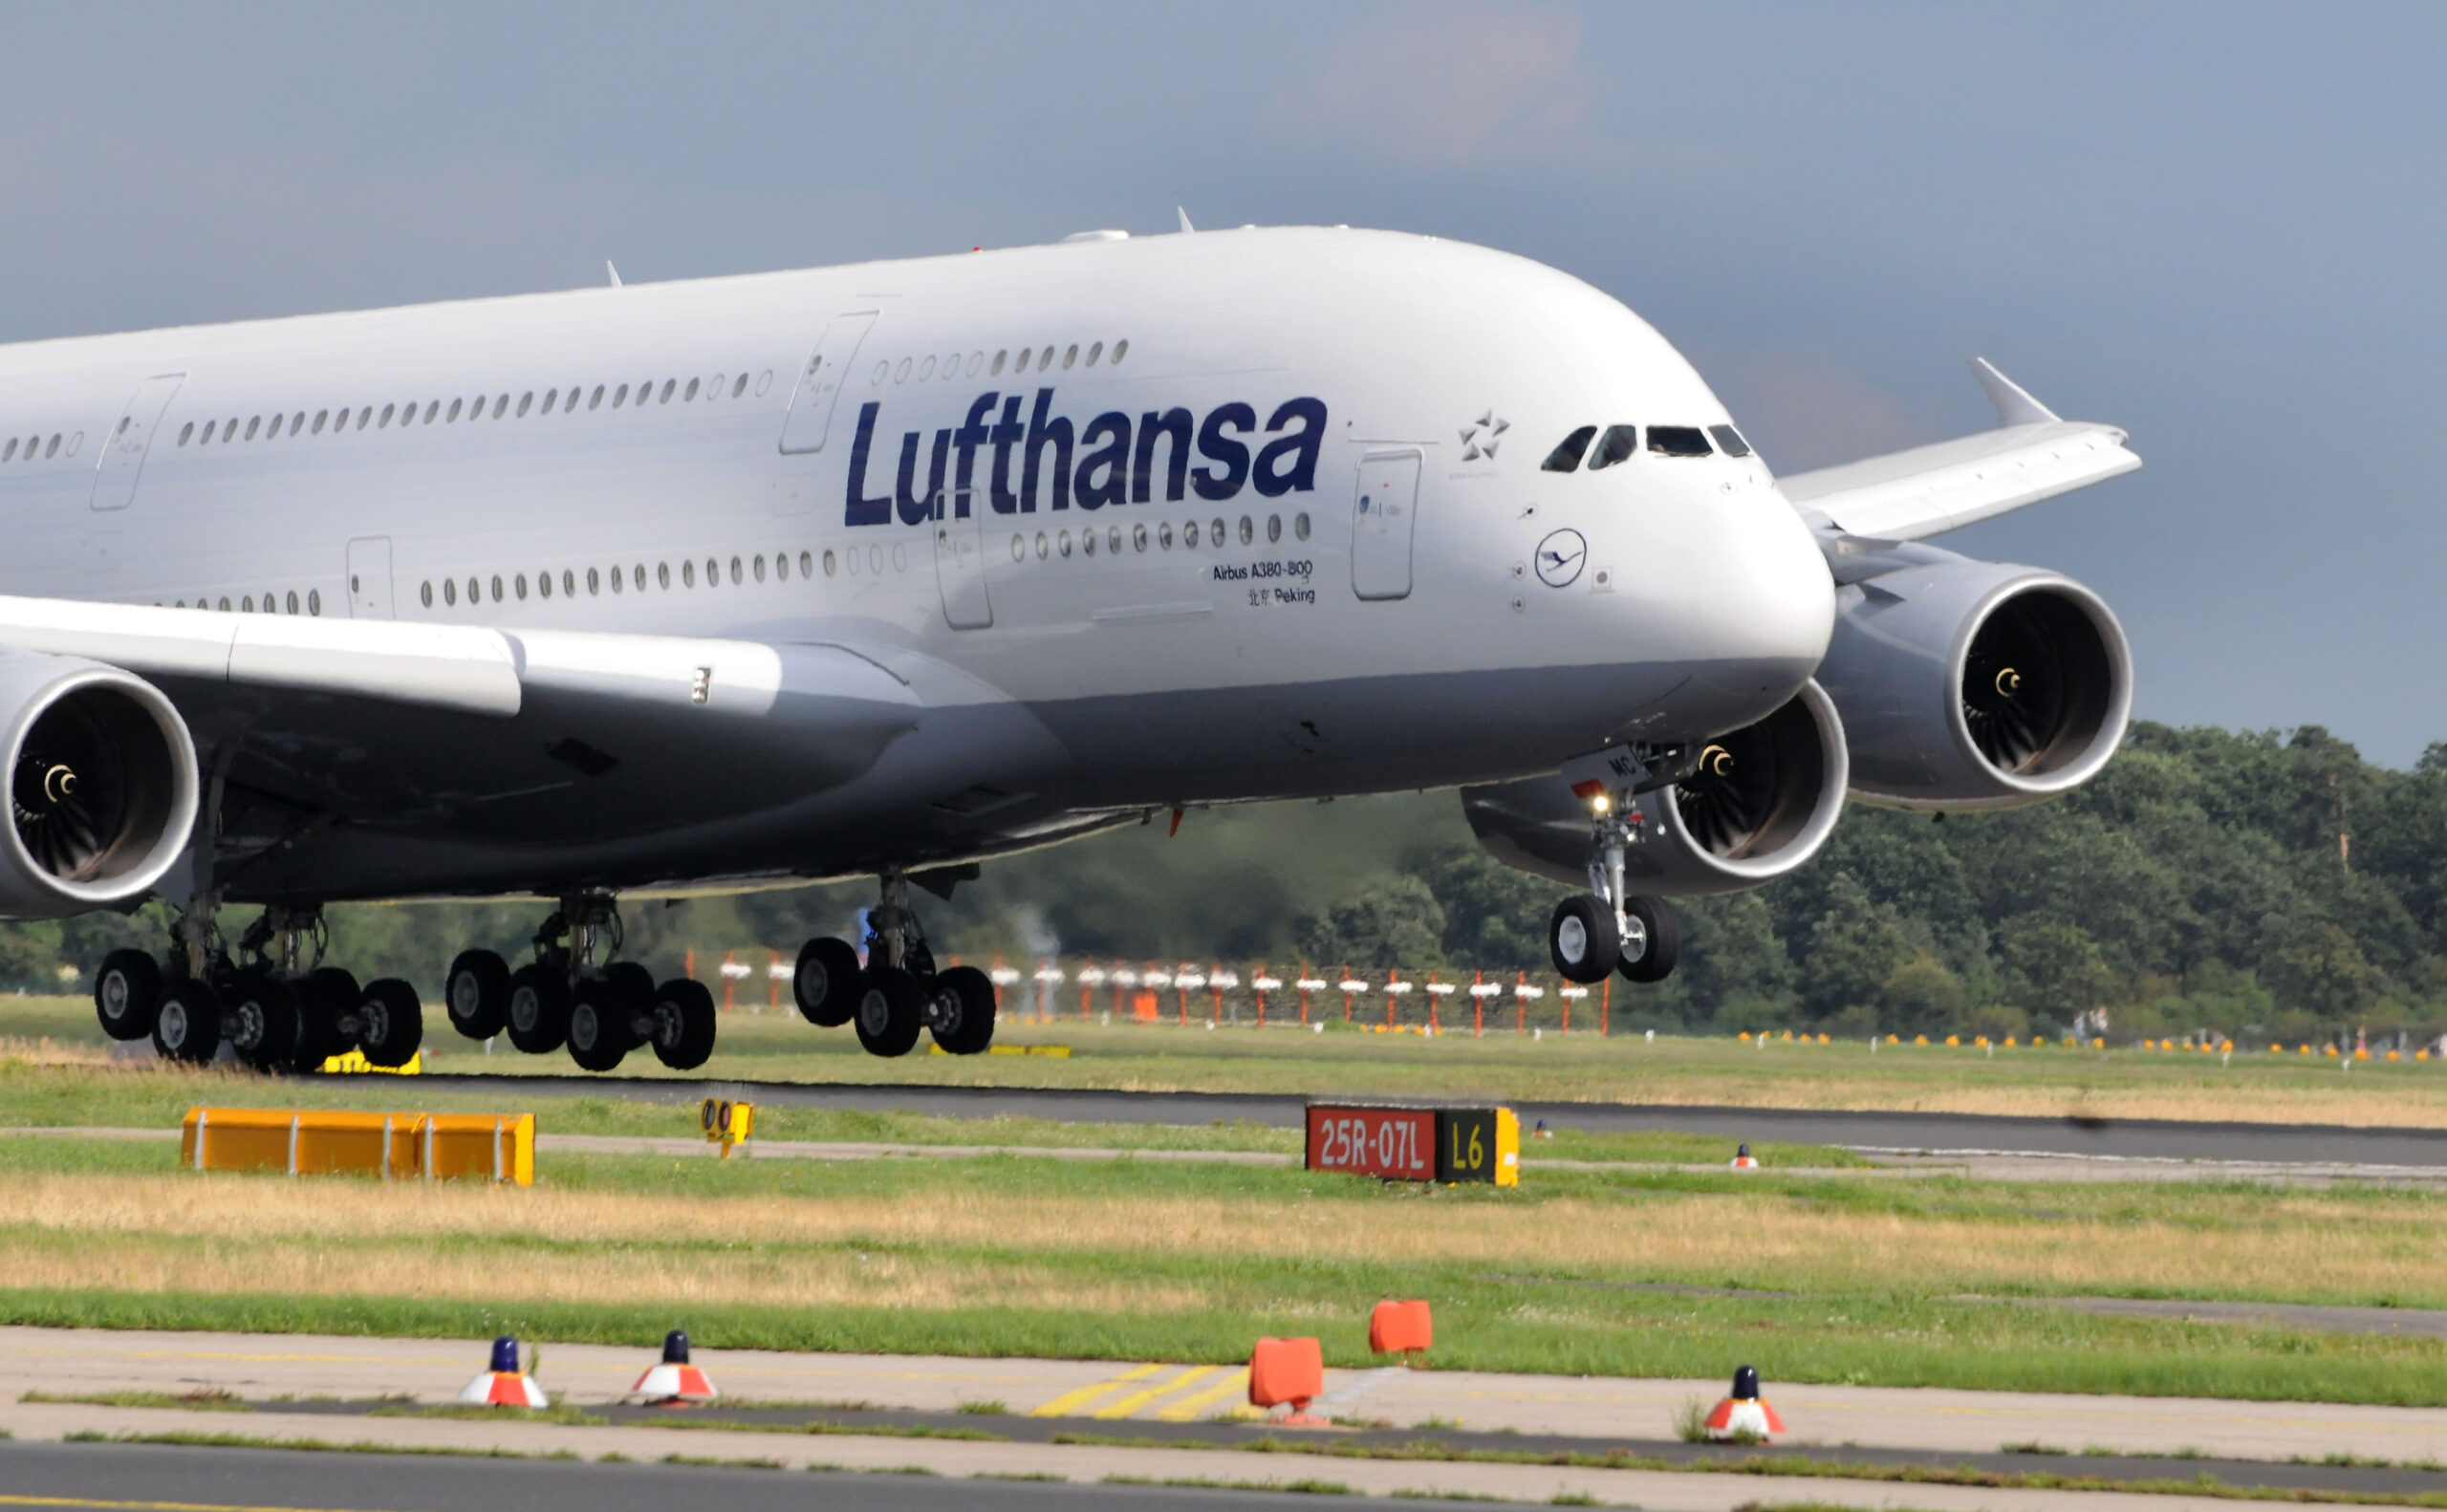 Lufthansa Brings Back the A380 to Serve Boston and New York